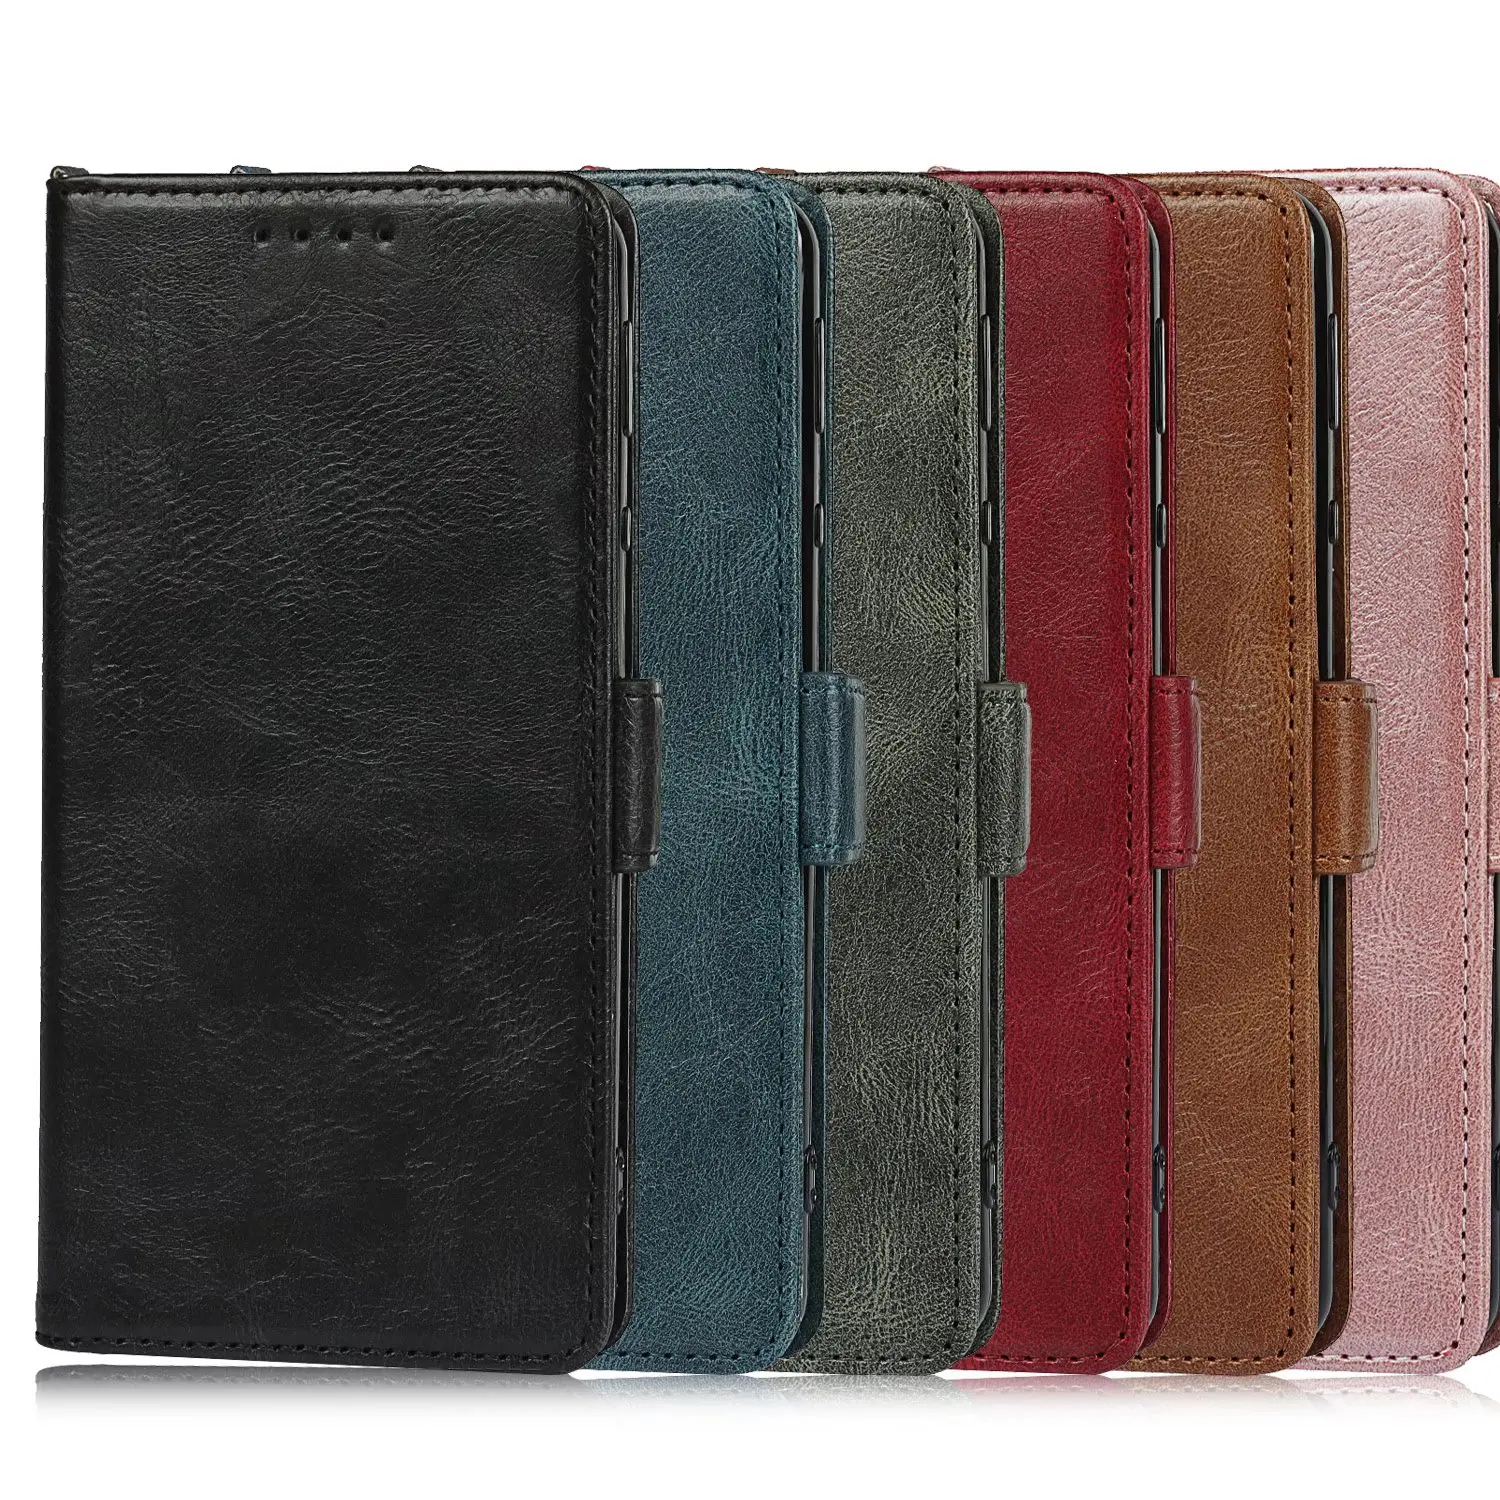 

Middle button vintage double fold flap PU Wallet Leather Case For Sony Xperia XZ2 Premium, As pictures